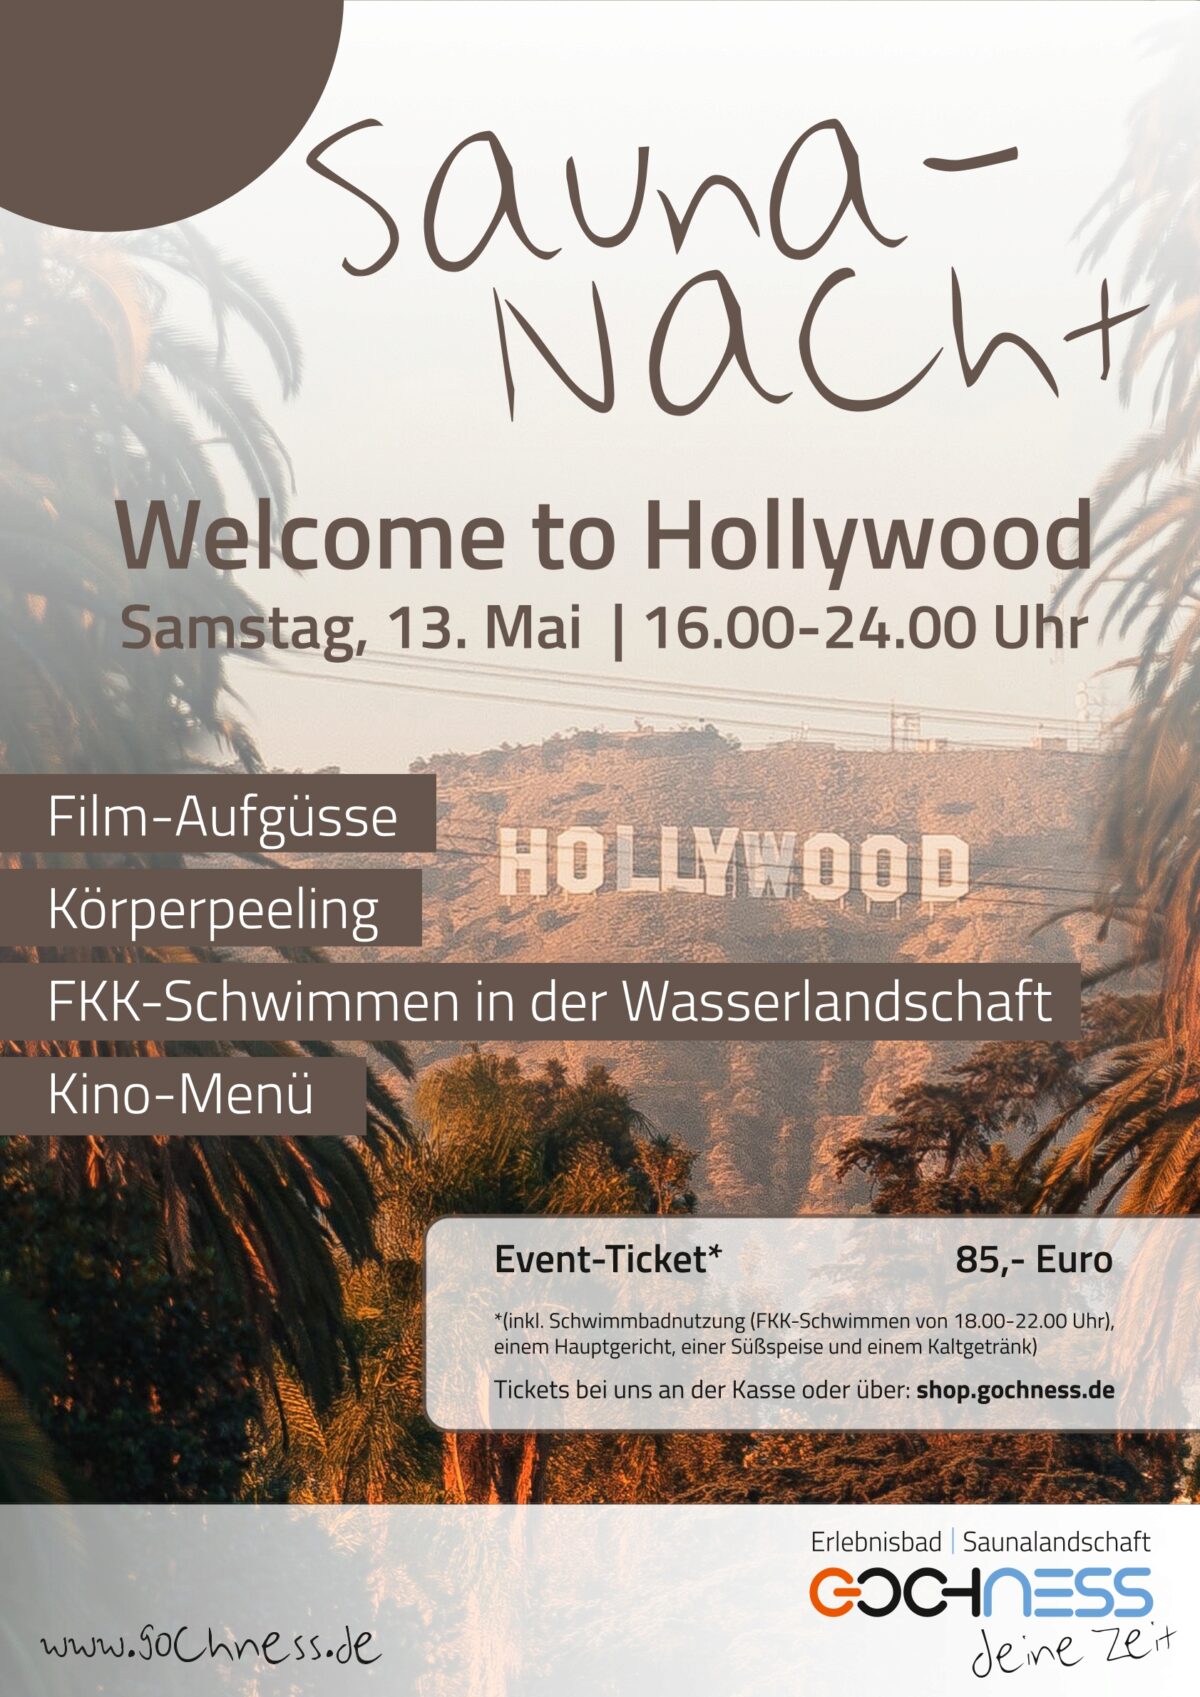 Saunanacht "Welcome to Hollywood"